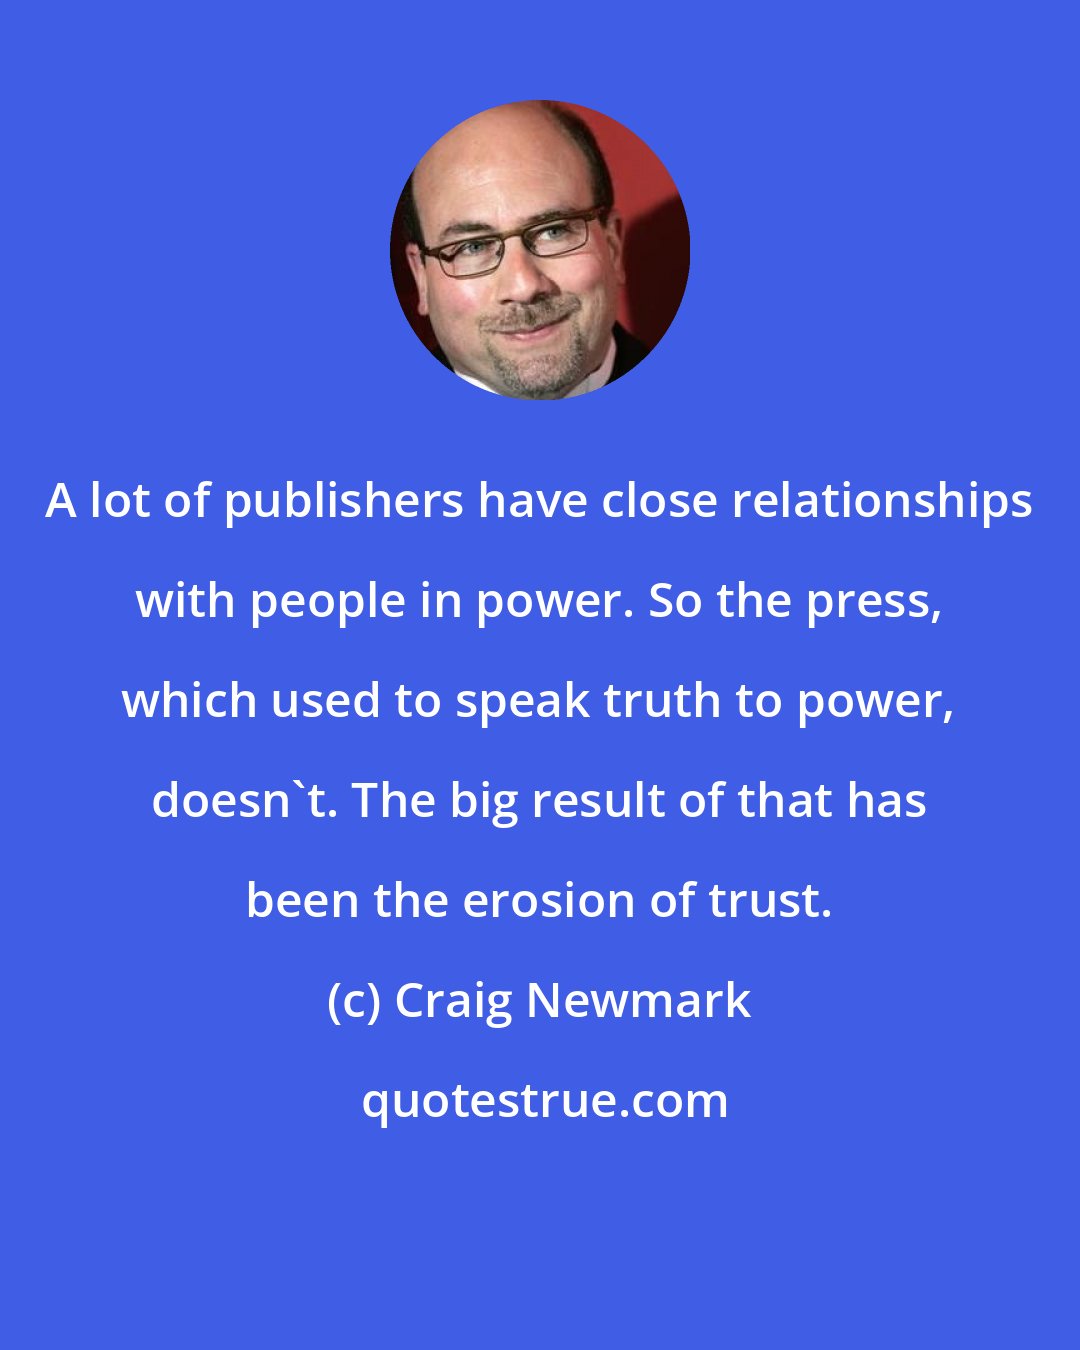 Craig Newmark: A lot of publishers have close relationships with people in power. So the press, which used to speak truth to power, doesn't. The big result of that has been the erosion of trust.